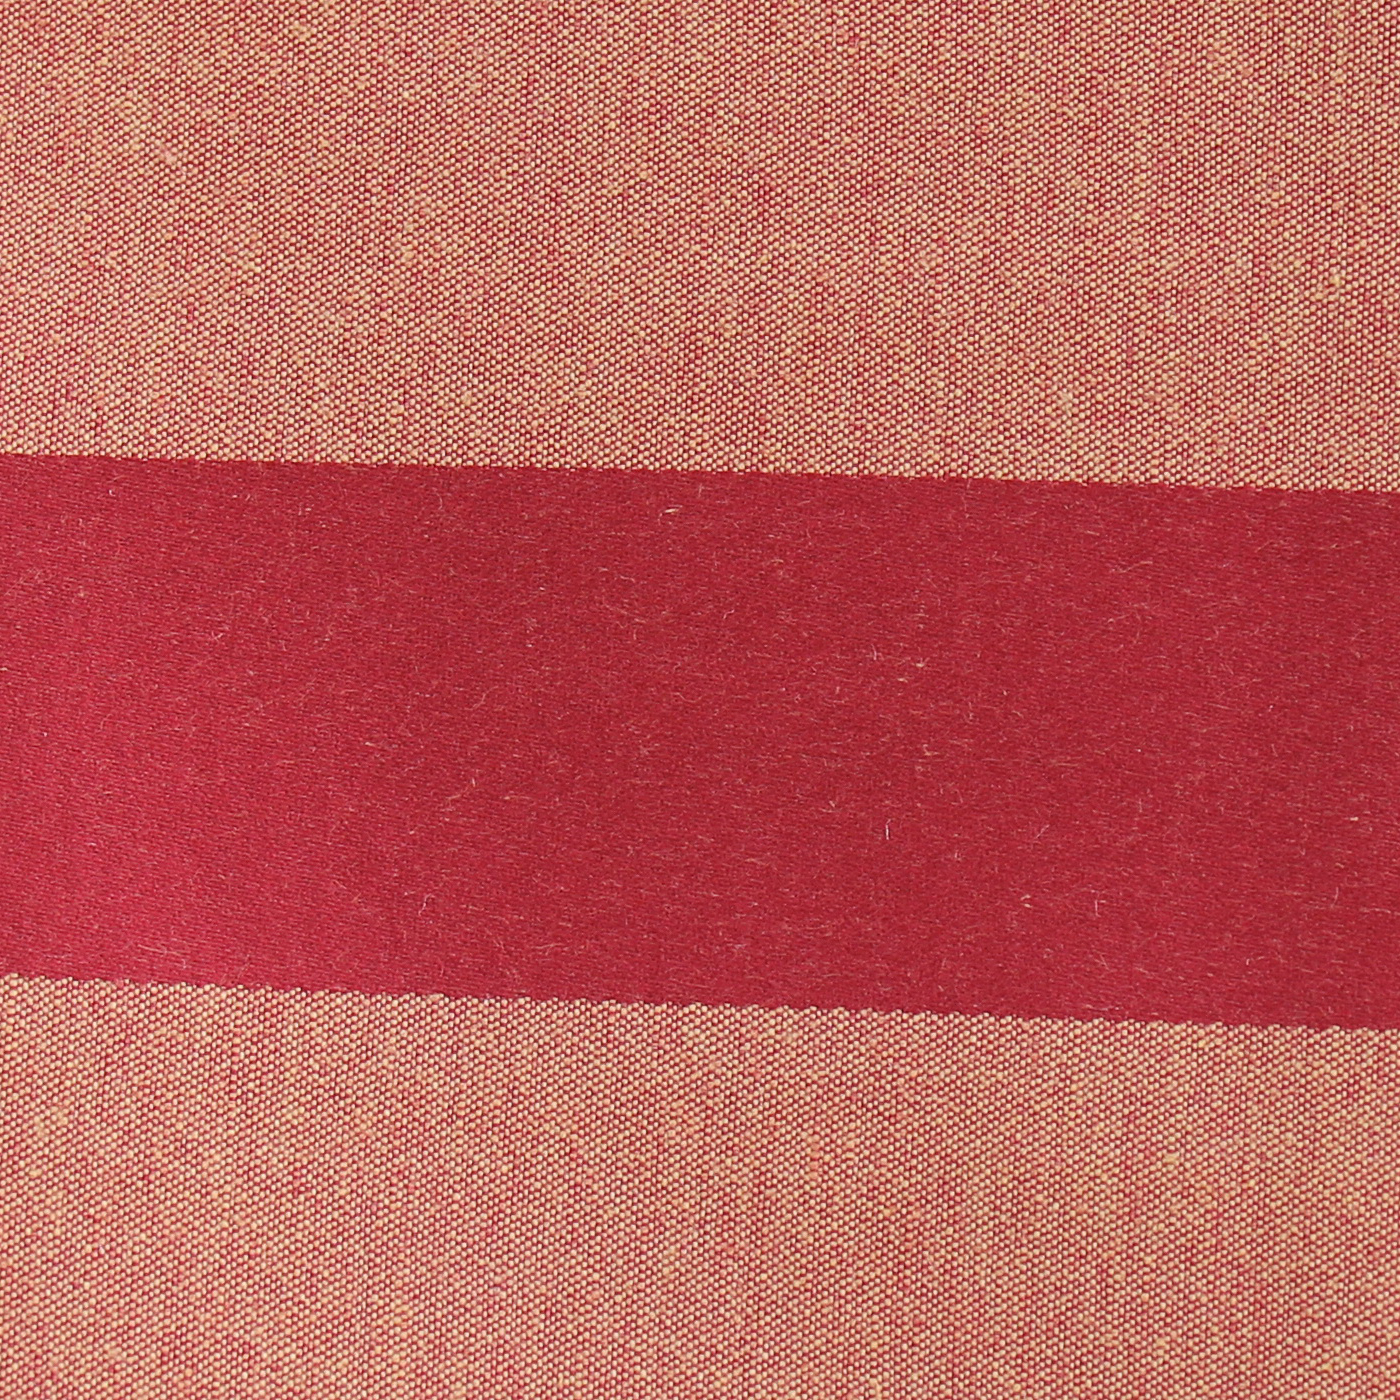 NO 26-45 RS X1 Plus NO 40 Fabric Upholstery Sample